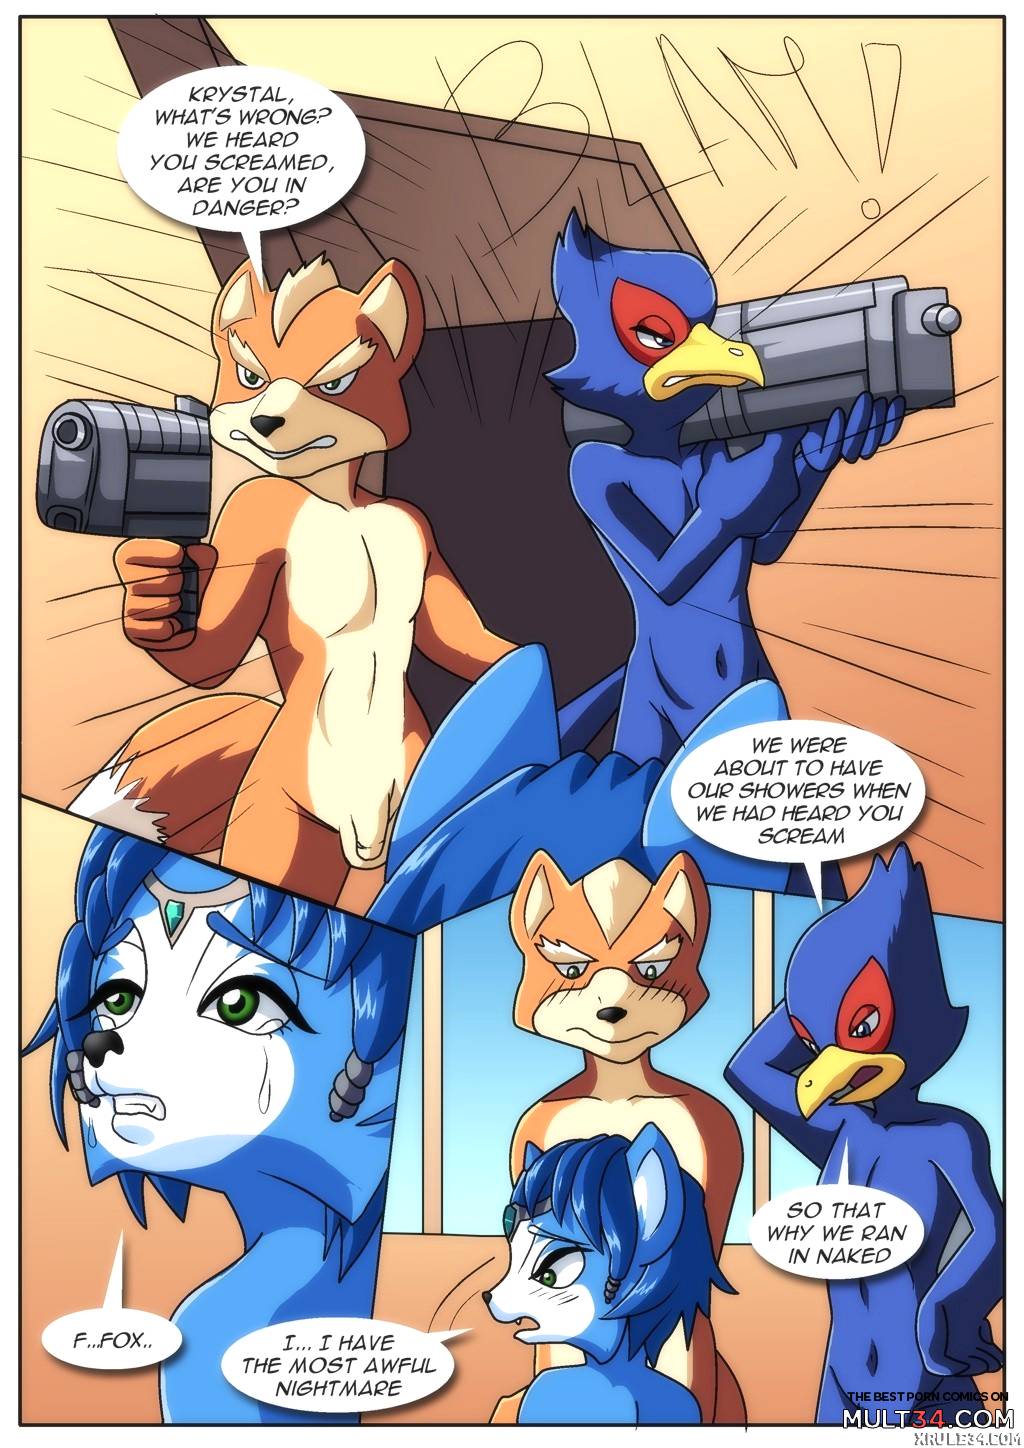 1024px x 1448px - Porn comics with Fox McCloud, the best collection of porn comics